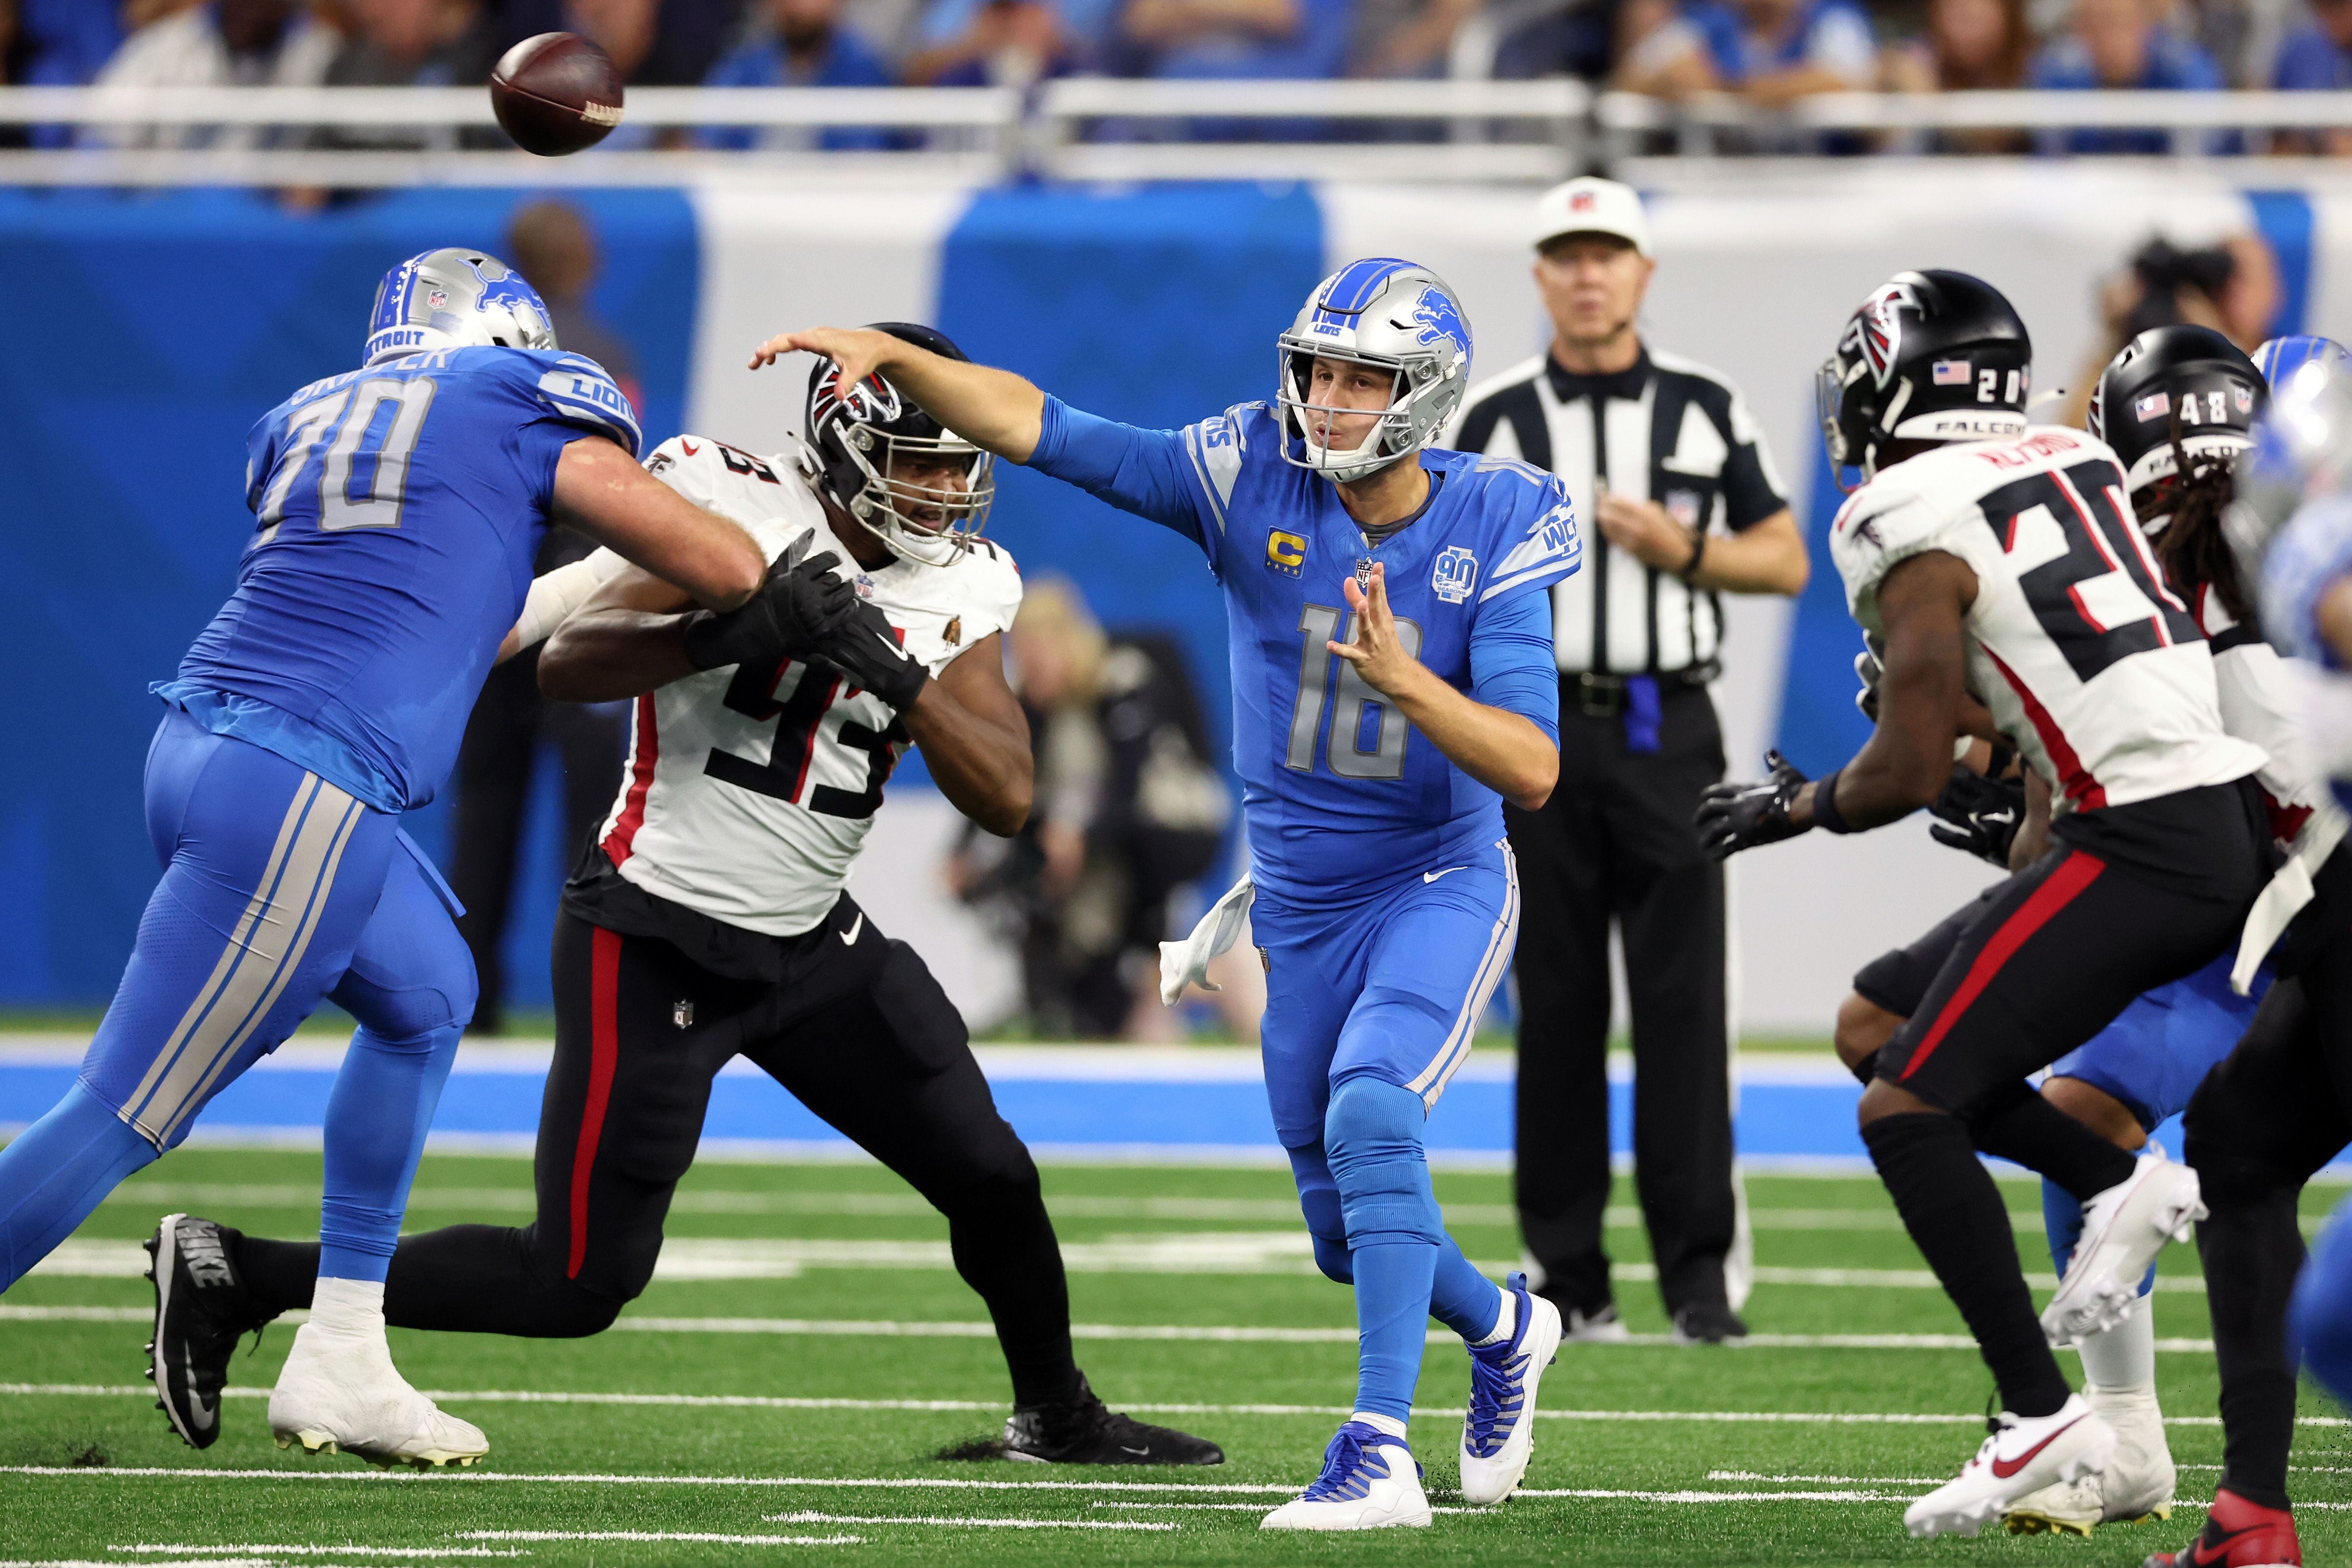 Jared Goff throws and runs for TDs, helping the Lions bounce back with a  20-6 win over Falcons - The San Diego Union-Tribune